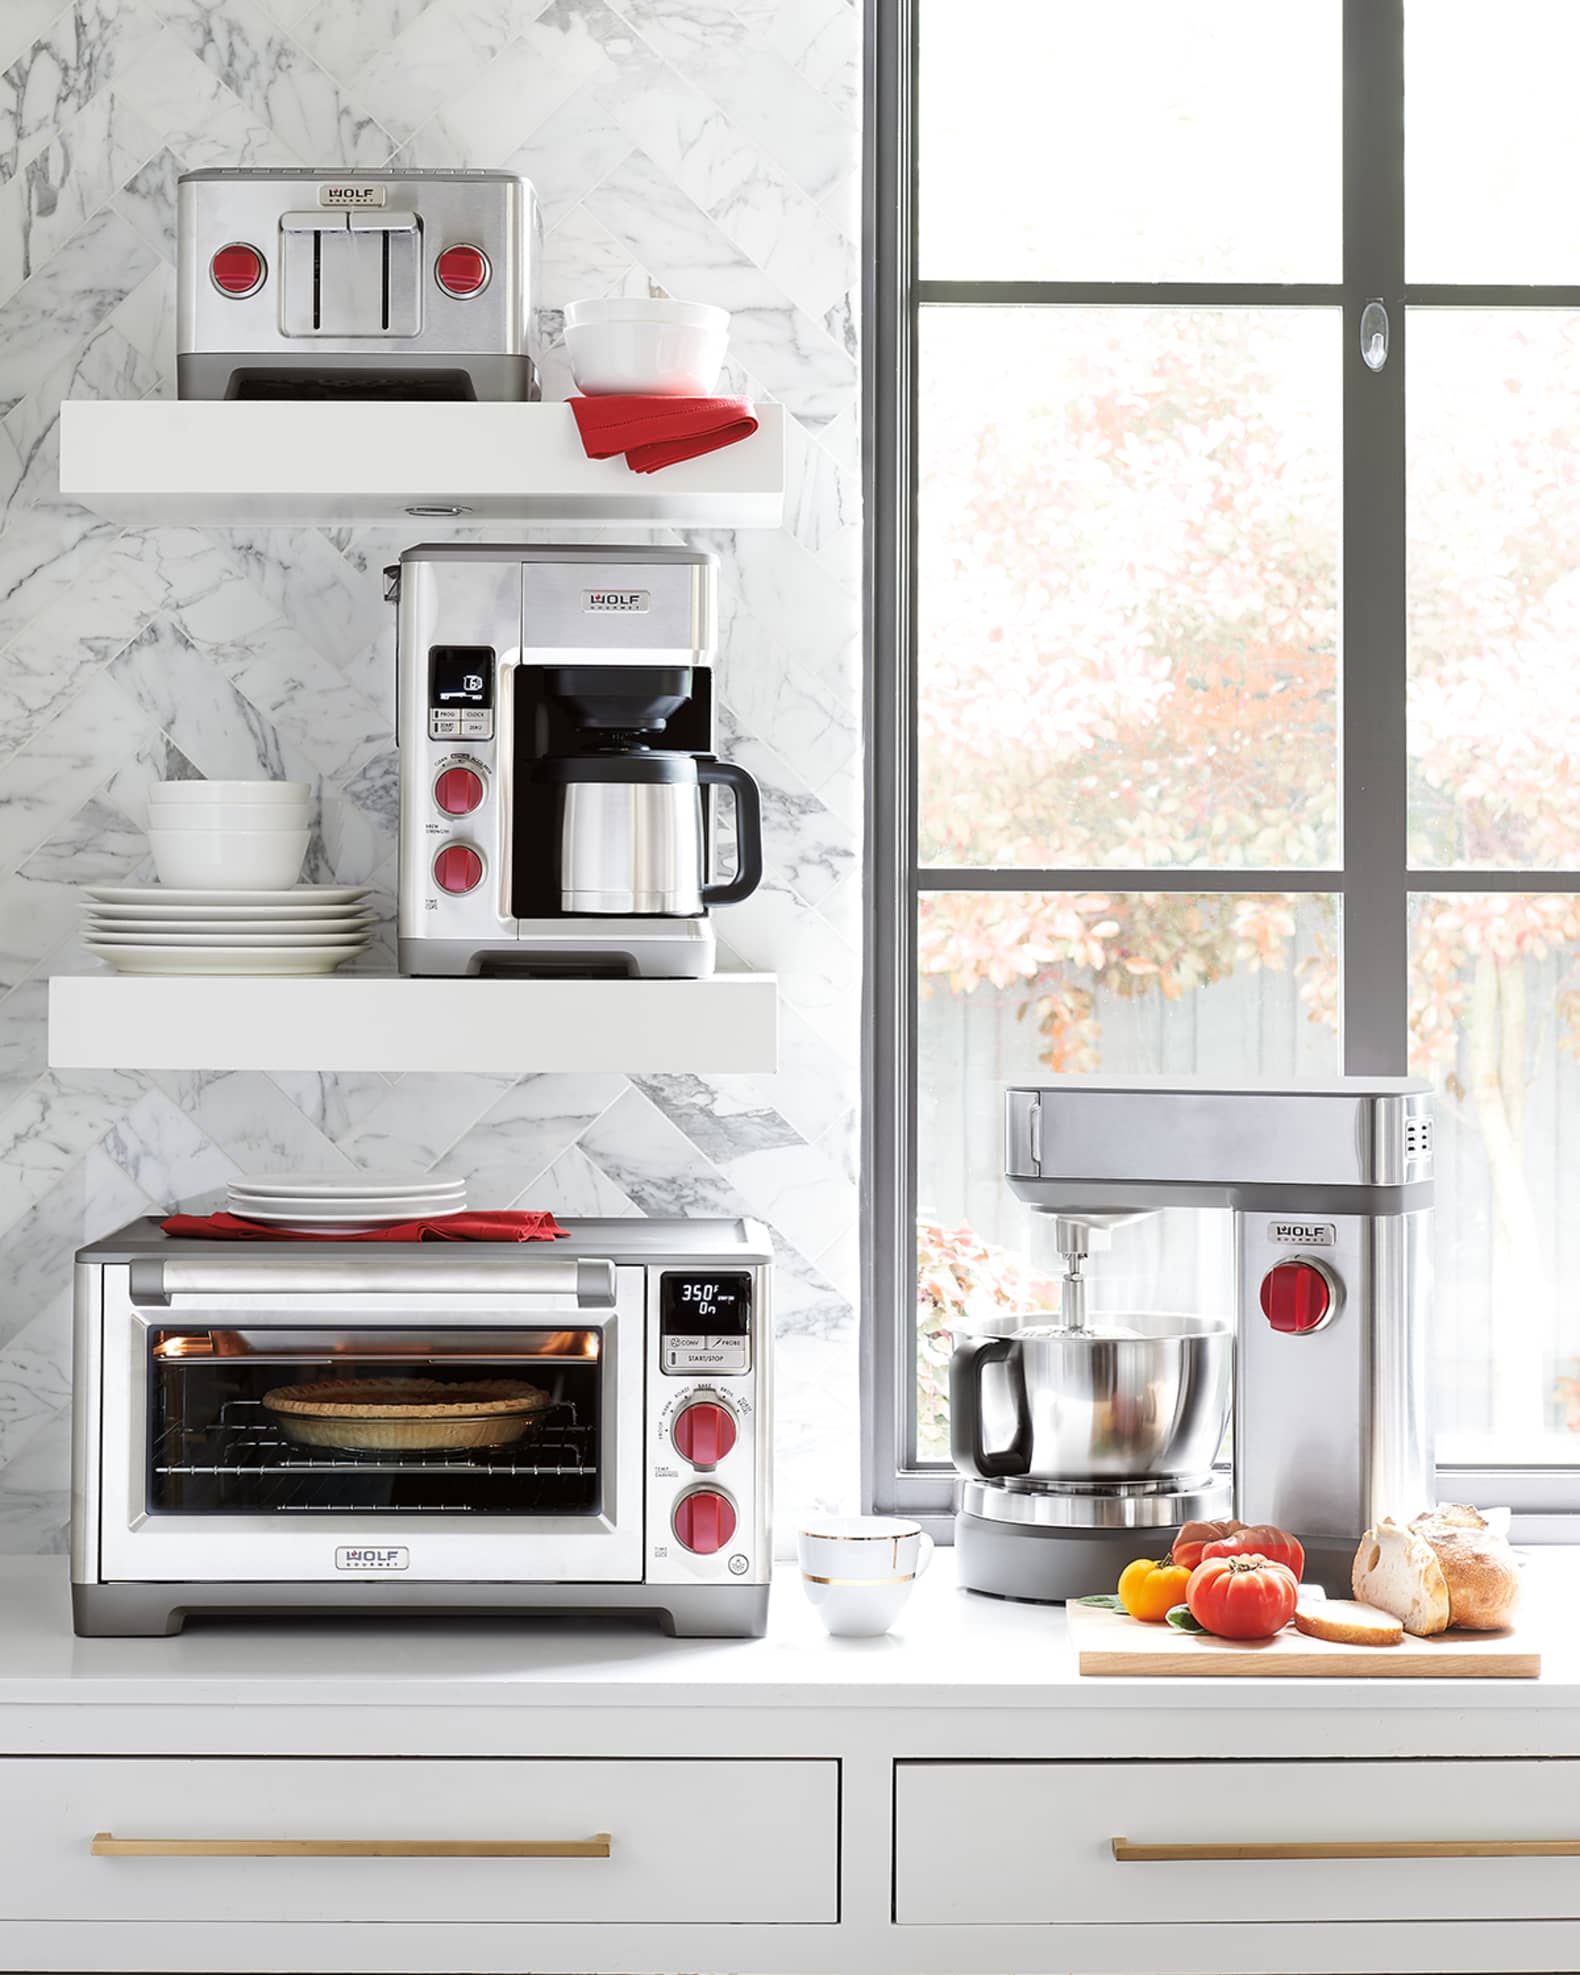 Wolf Gourmet Countertop Oven with Red Knobs + Reviews